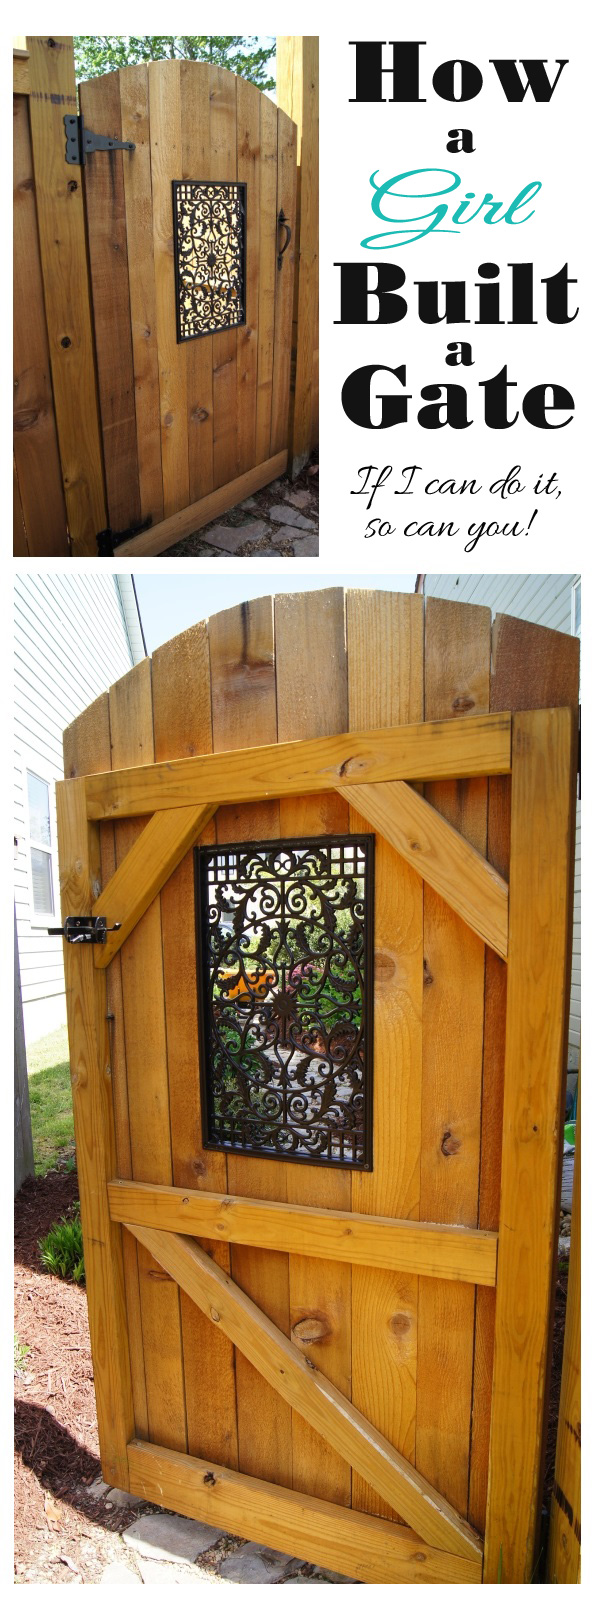 Build a Side Gate with a Decorative Window. 